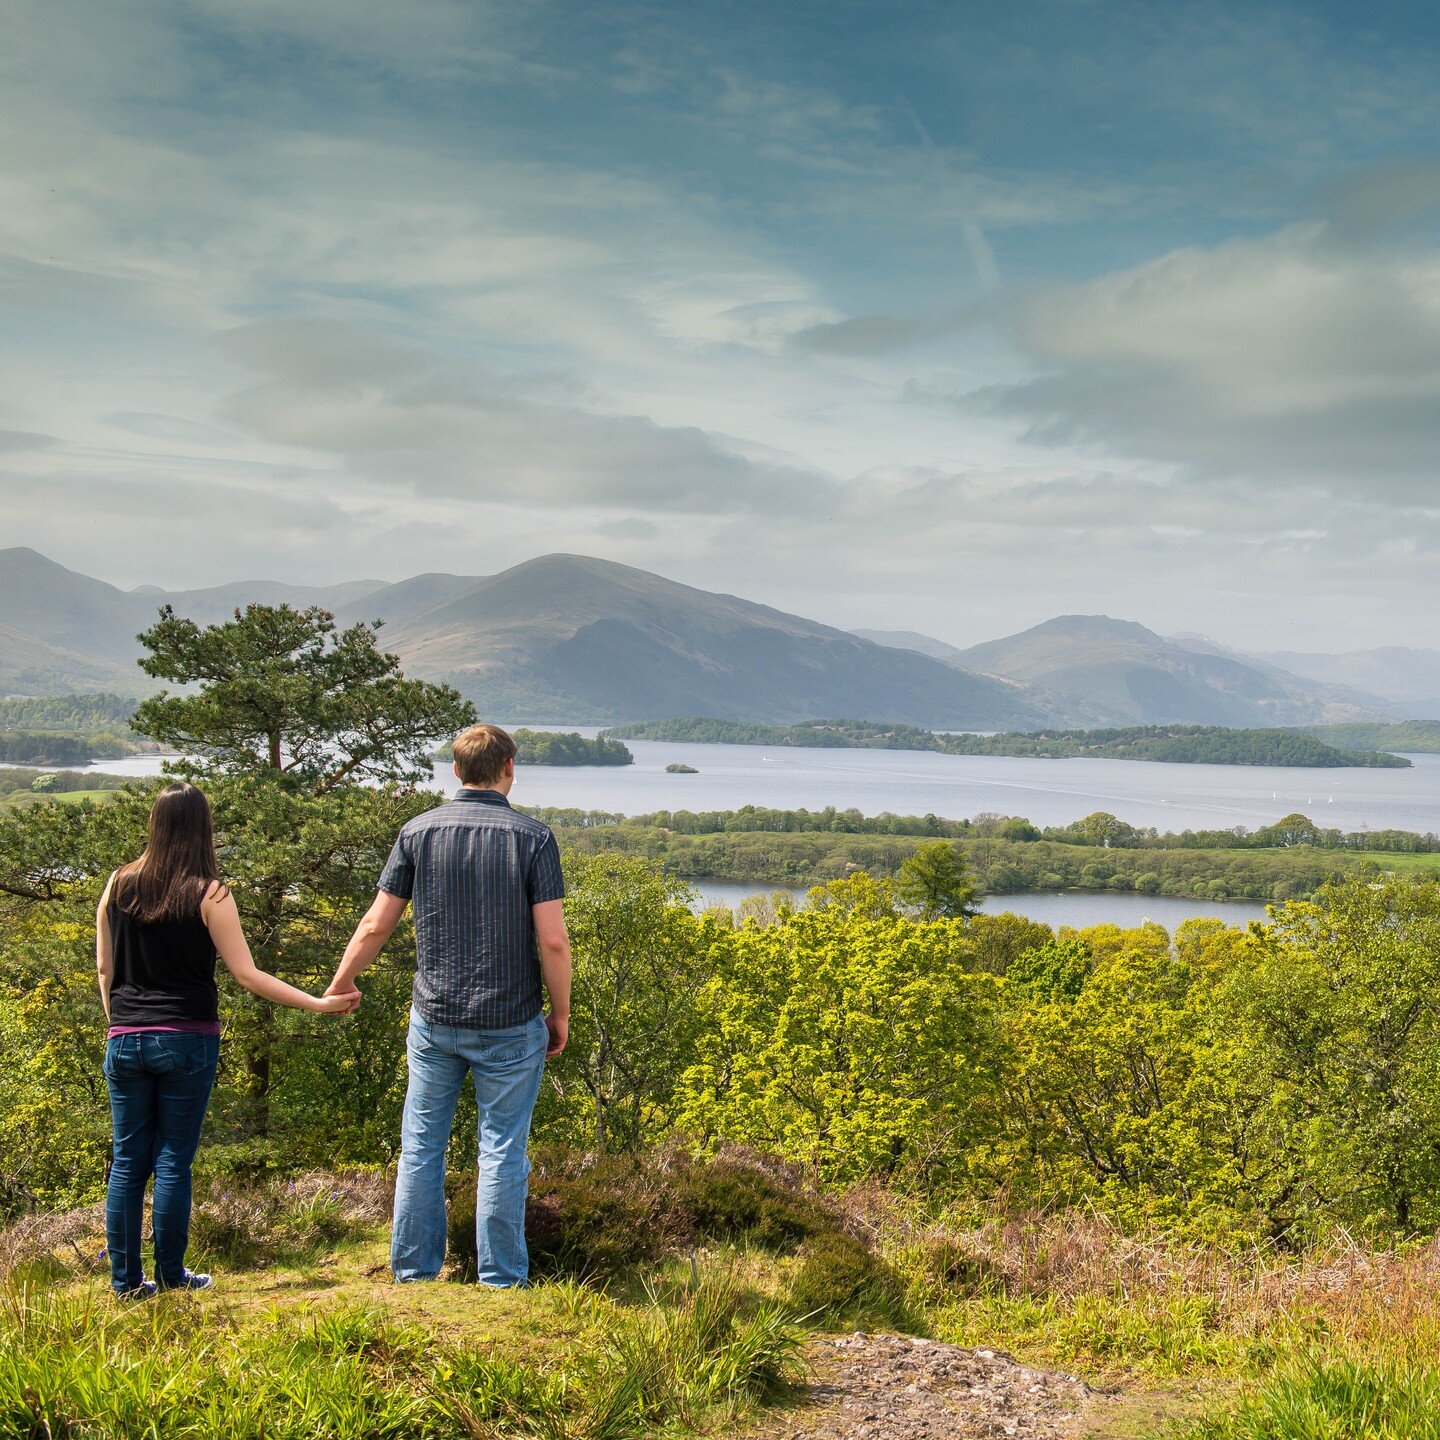 Love the amazing summit viewpoint on Inchcailloch Island, and I look forward to visiting with a couple and a camera later this year #inchcaillochisland #balmaha #seelochlomond #lochlomond #brideandgroomphotos #outsideweddings #scotlandweddings